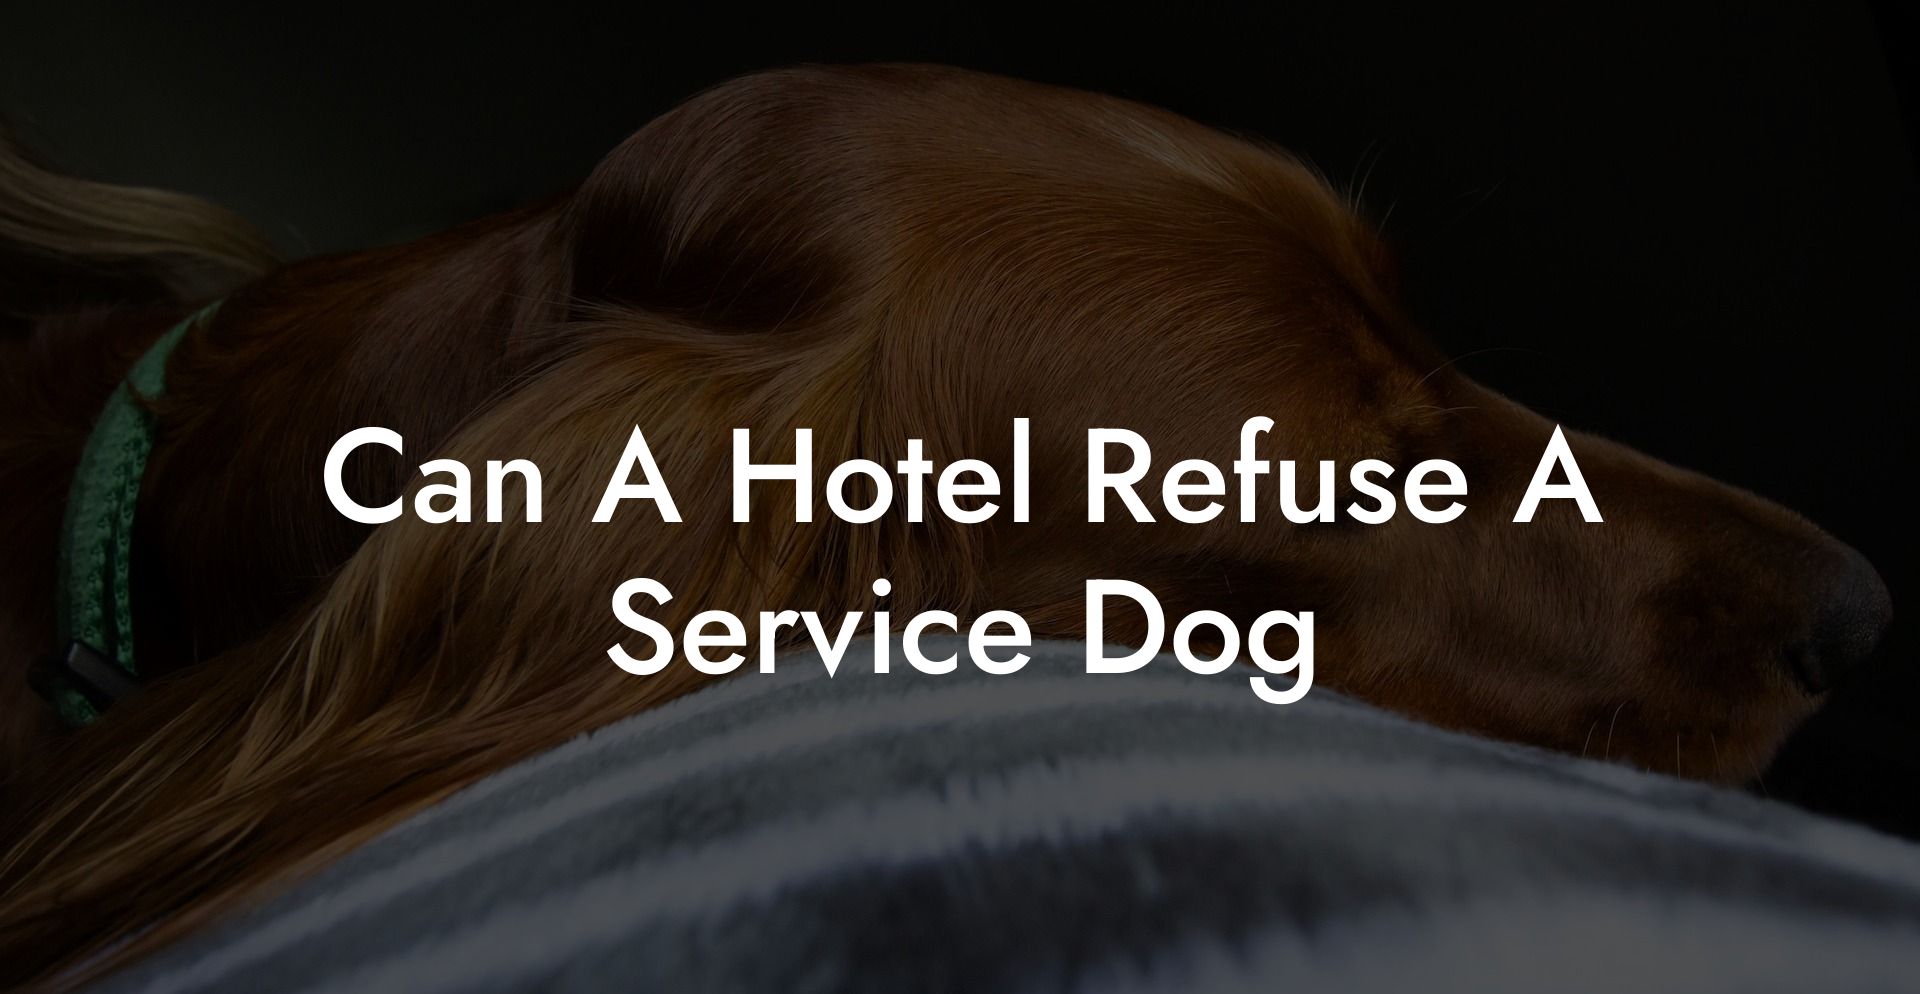 Can A Hotel Refuse A Service Dog